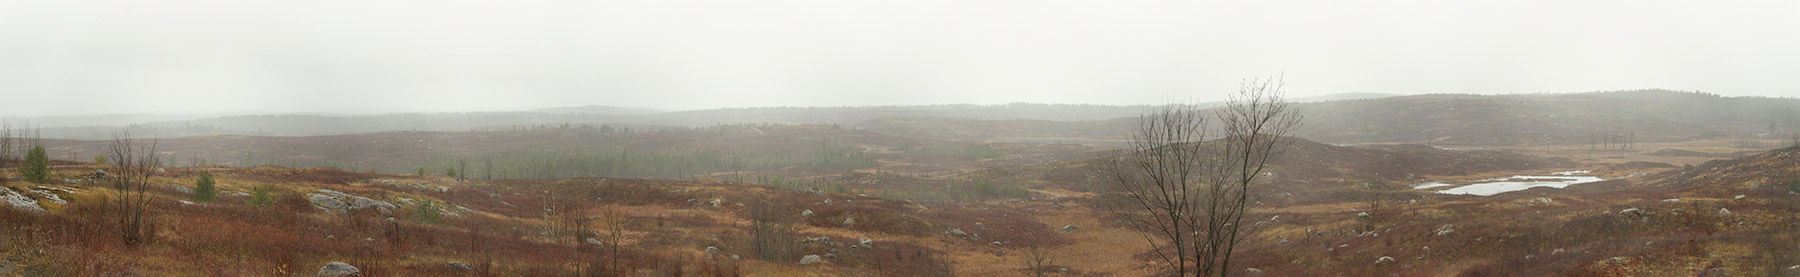 Panoramic photo of a landscape with bare trees under a grey sky